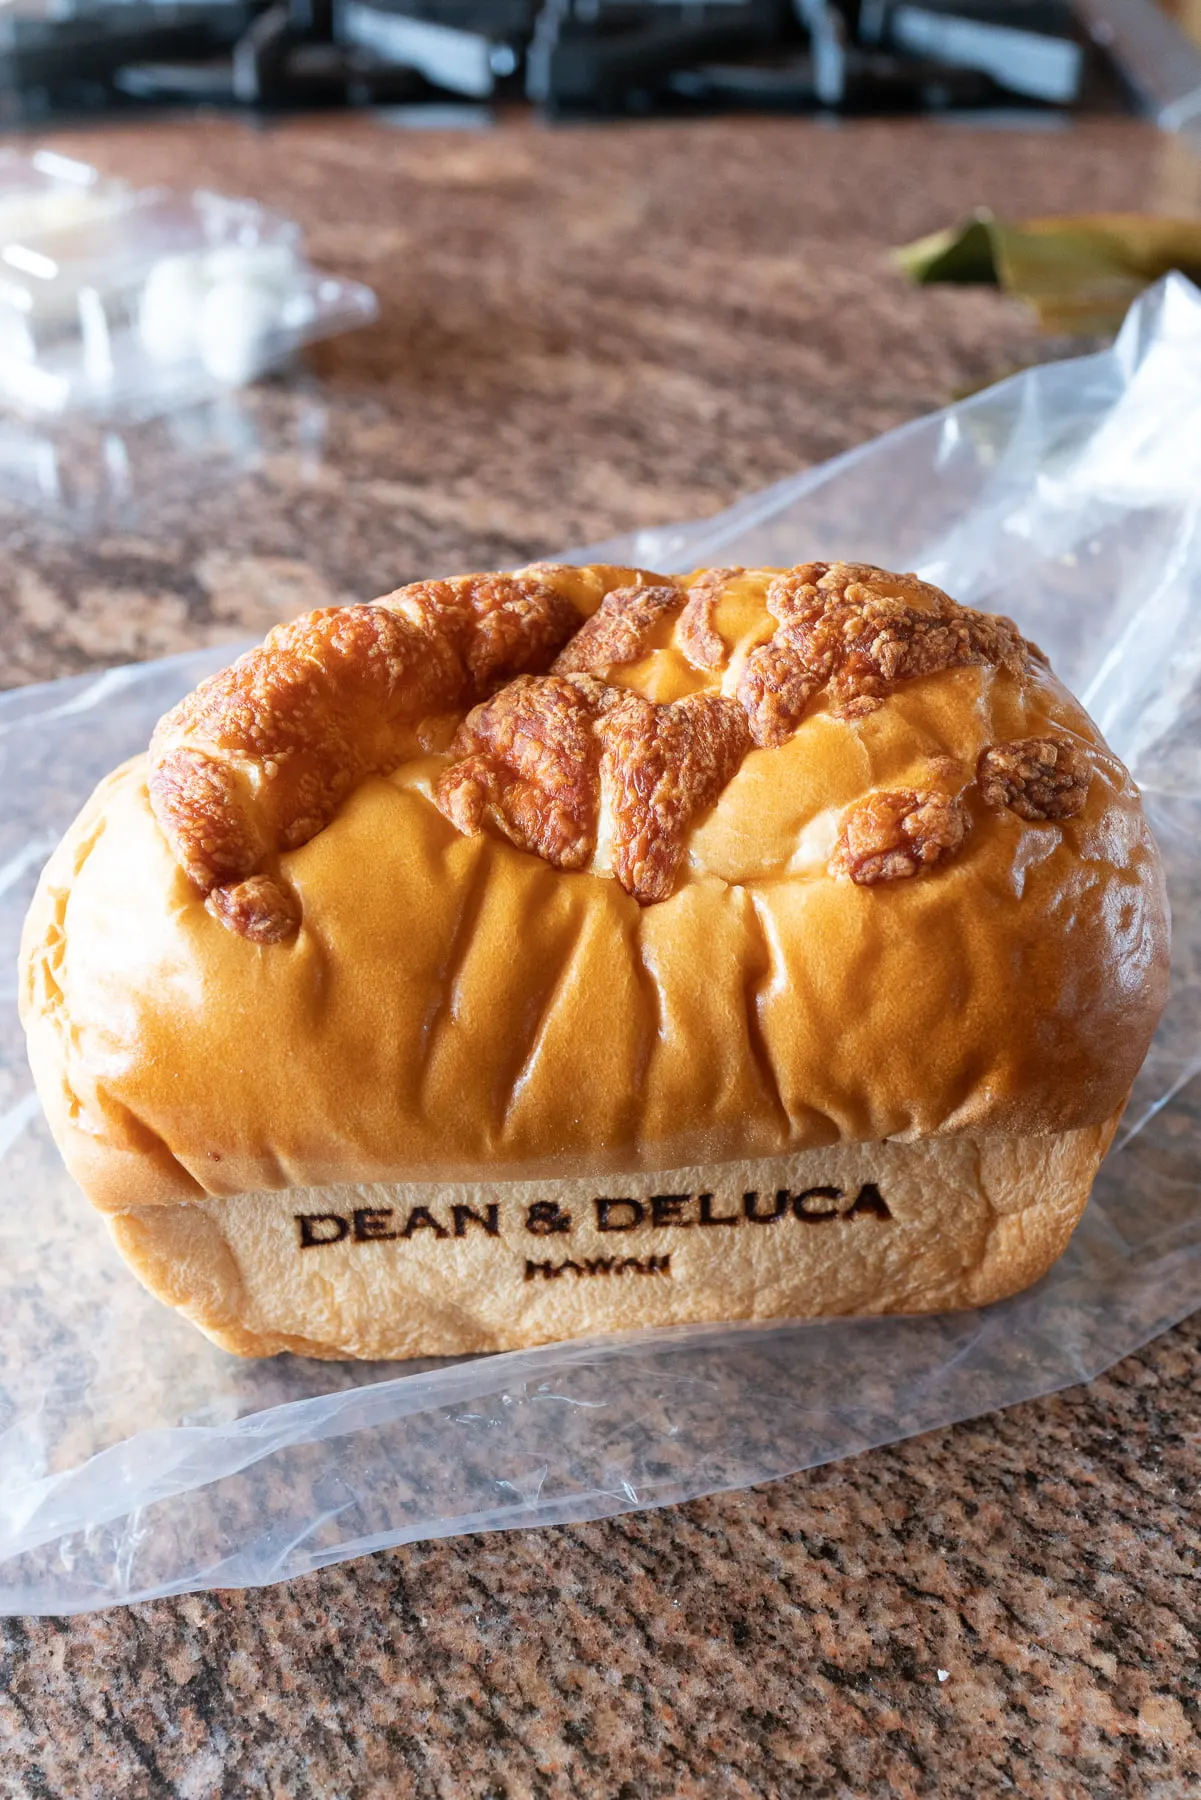 Cheese bread from Dean & Deluca Hawaii.